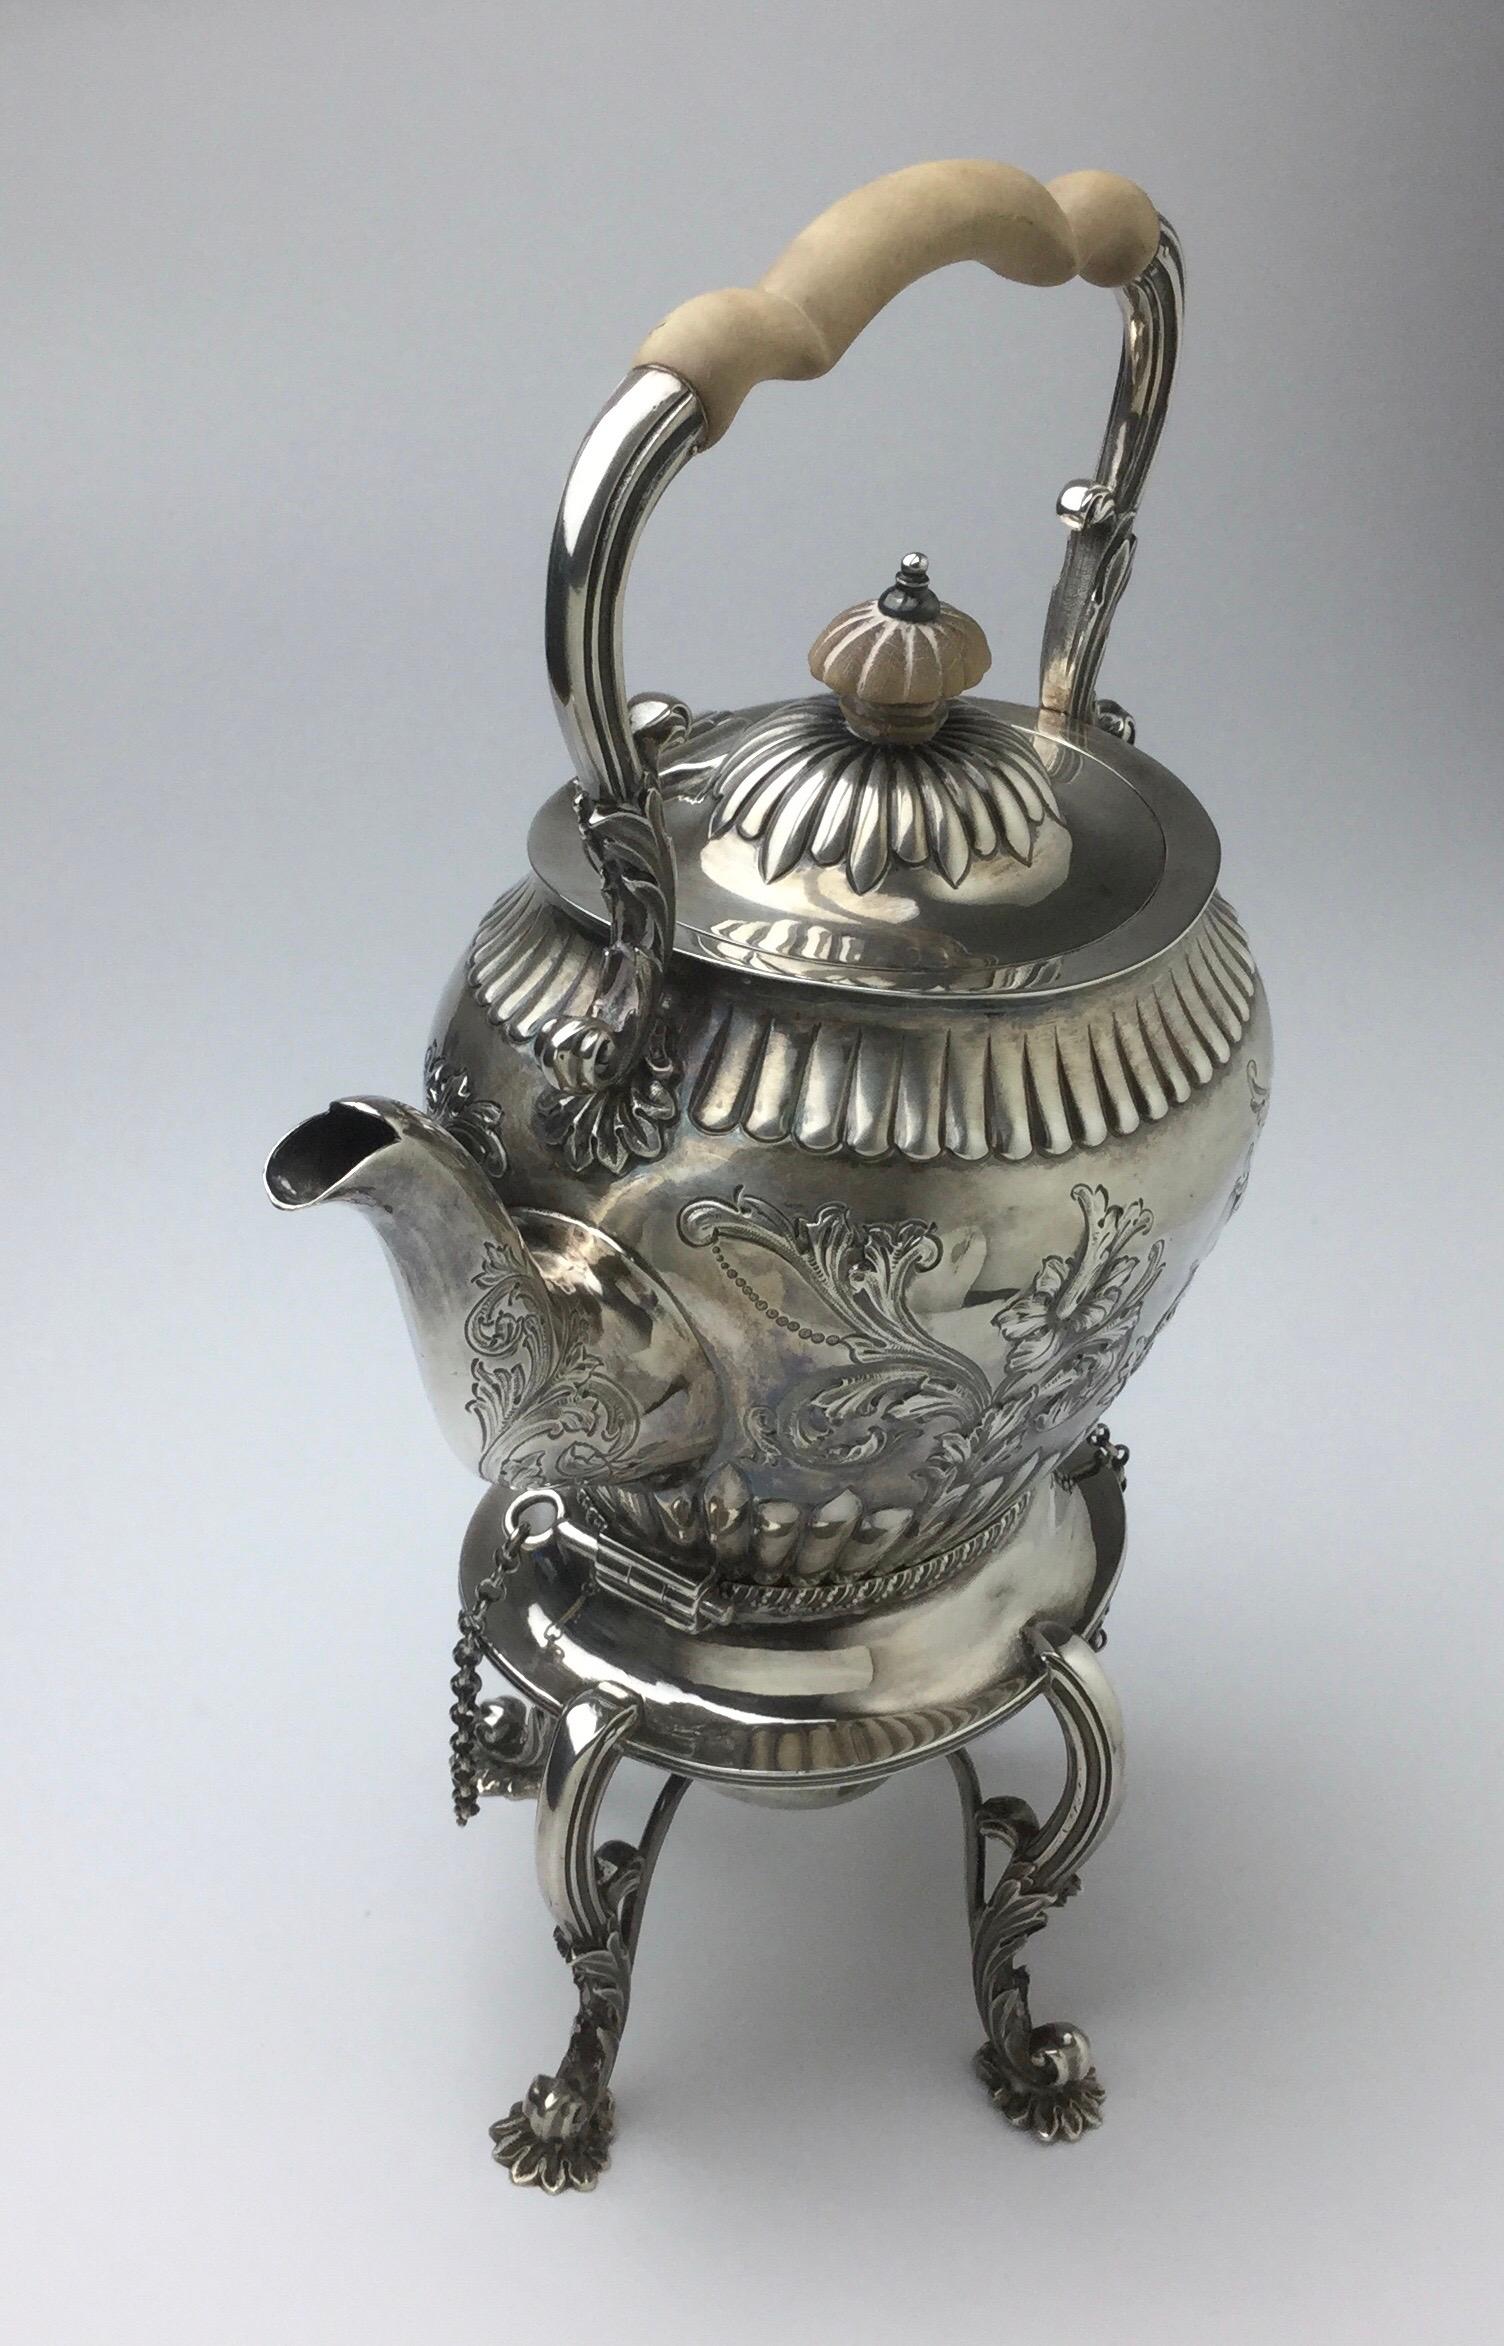 Beautifully made English sterling silver tip kettle. Stands 12 1/2” tall by 8” wide by 5” deep. Three pieces all hallmarked. Wonderful age appropriate condition. No digs or dents. Some minor ware to the lock pins.